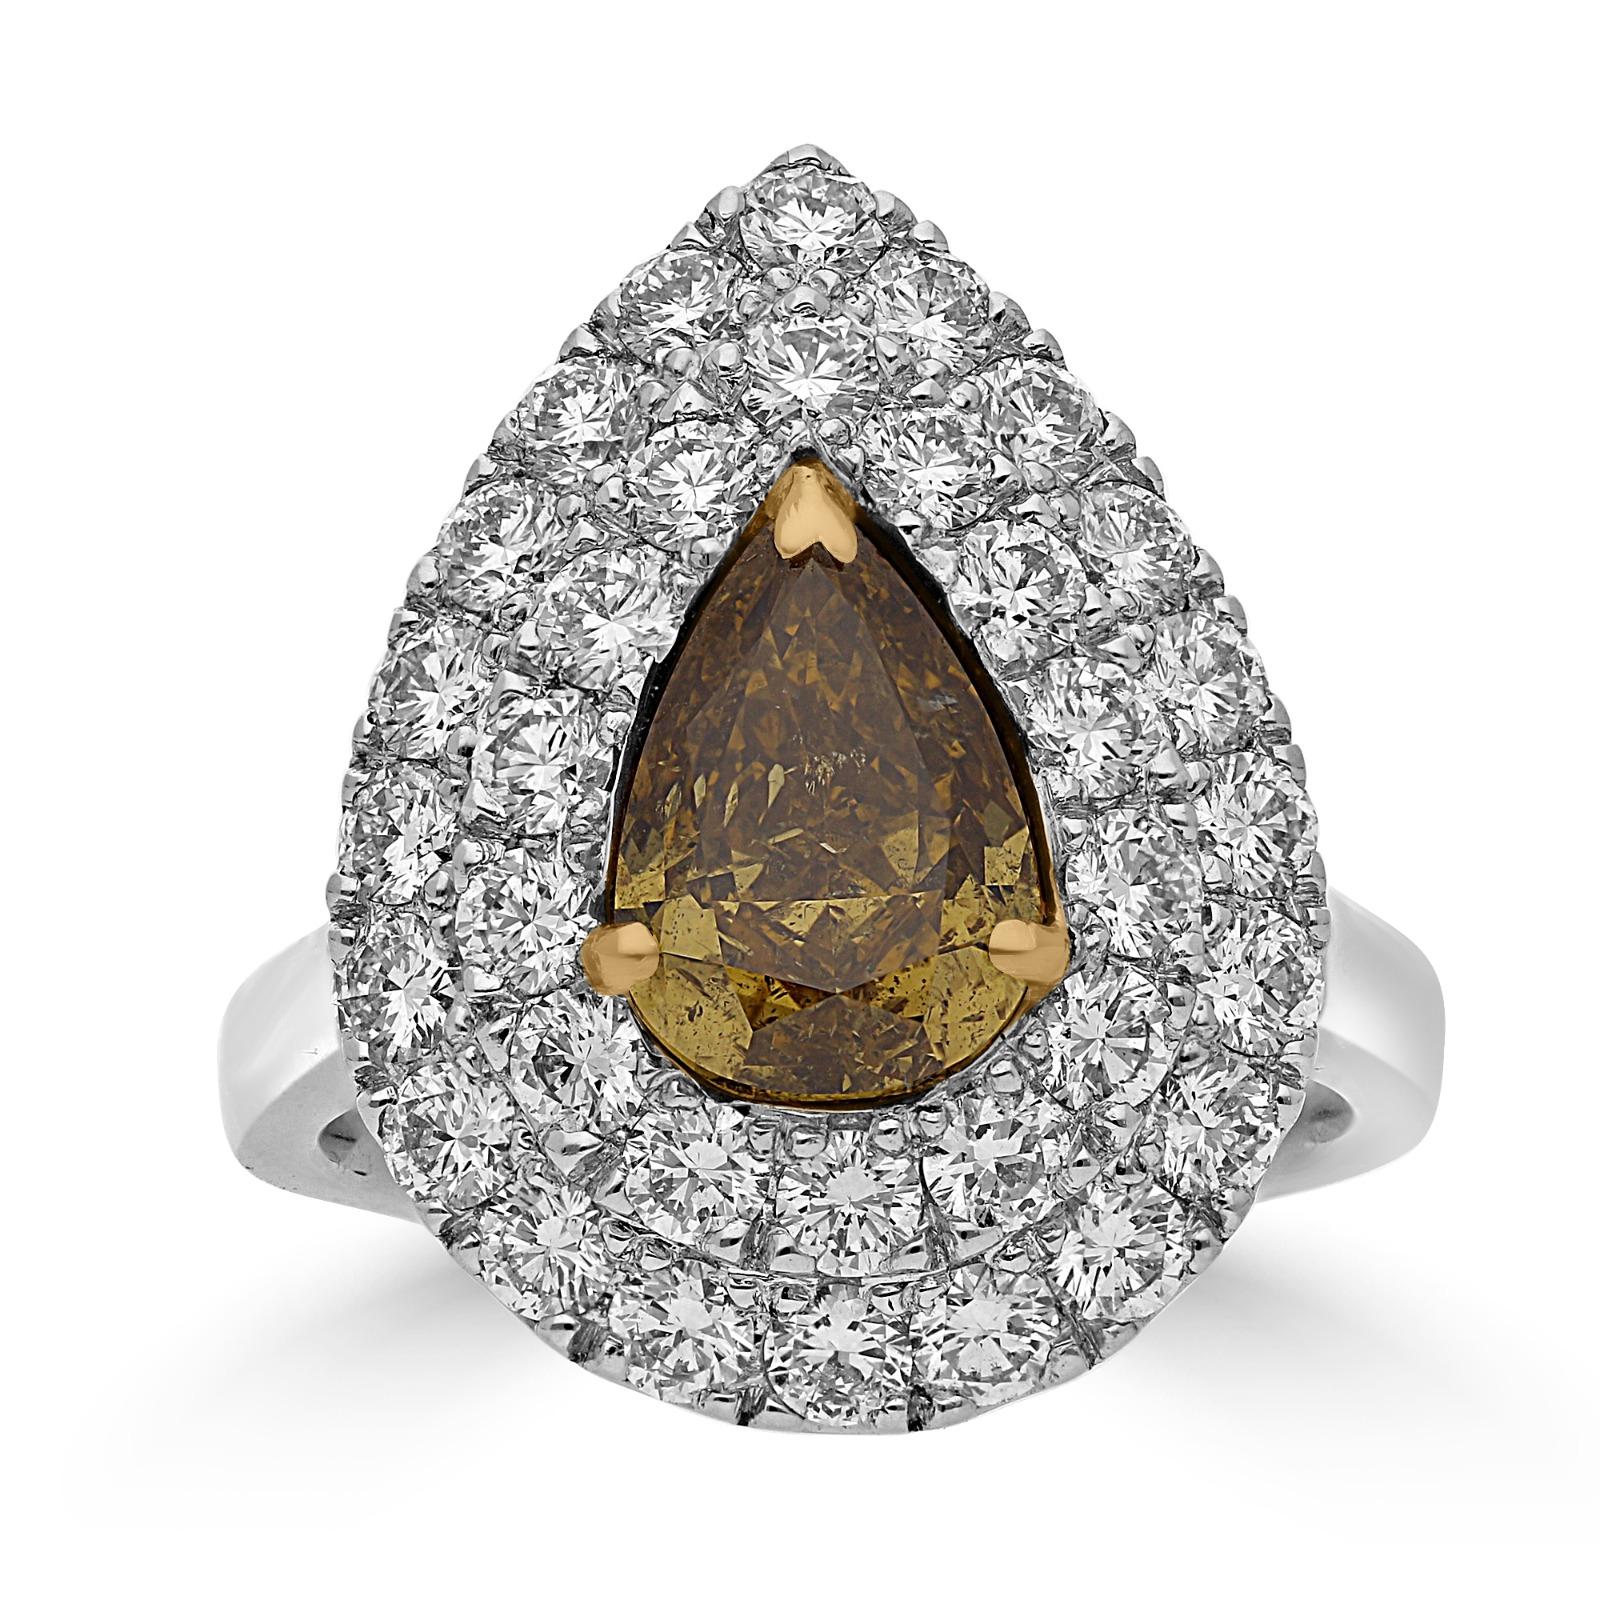 Only 1 in 10,000 diamonds has a fancy colour. This stunning platinum ring has a pear-shaped GIA certified fancy deep brownish orangey yellow diamond of 2.01ct and 1.88ct of round cut diamonds.